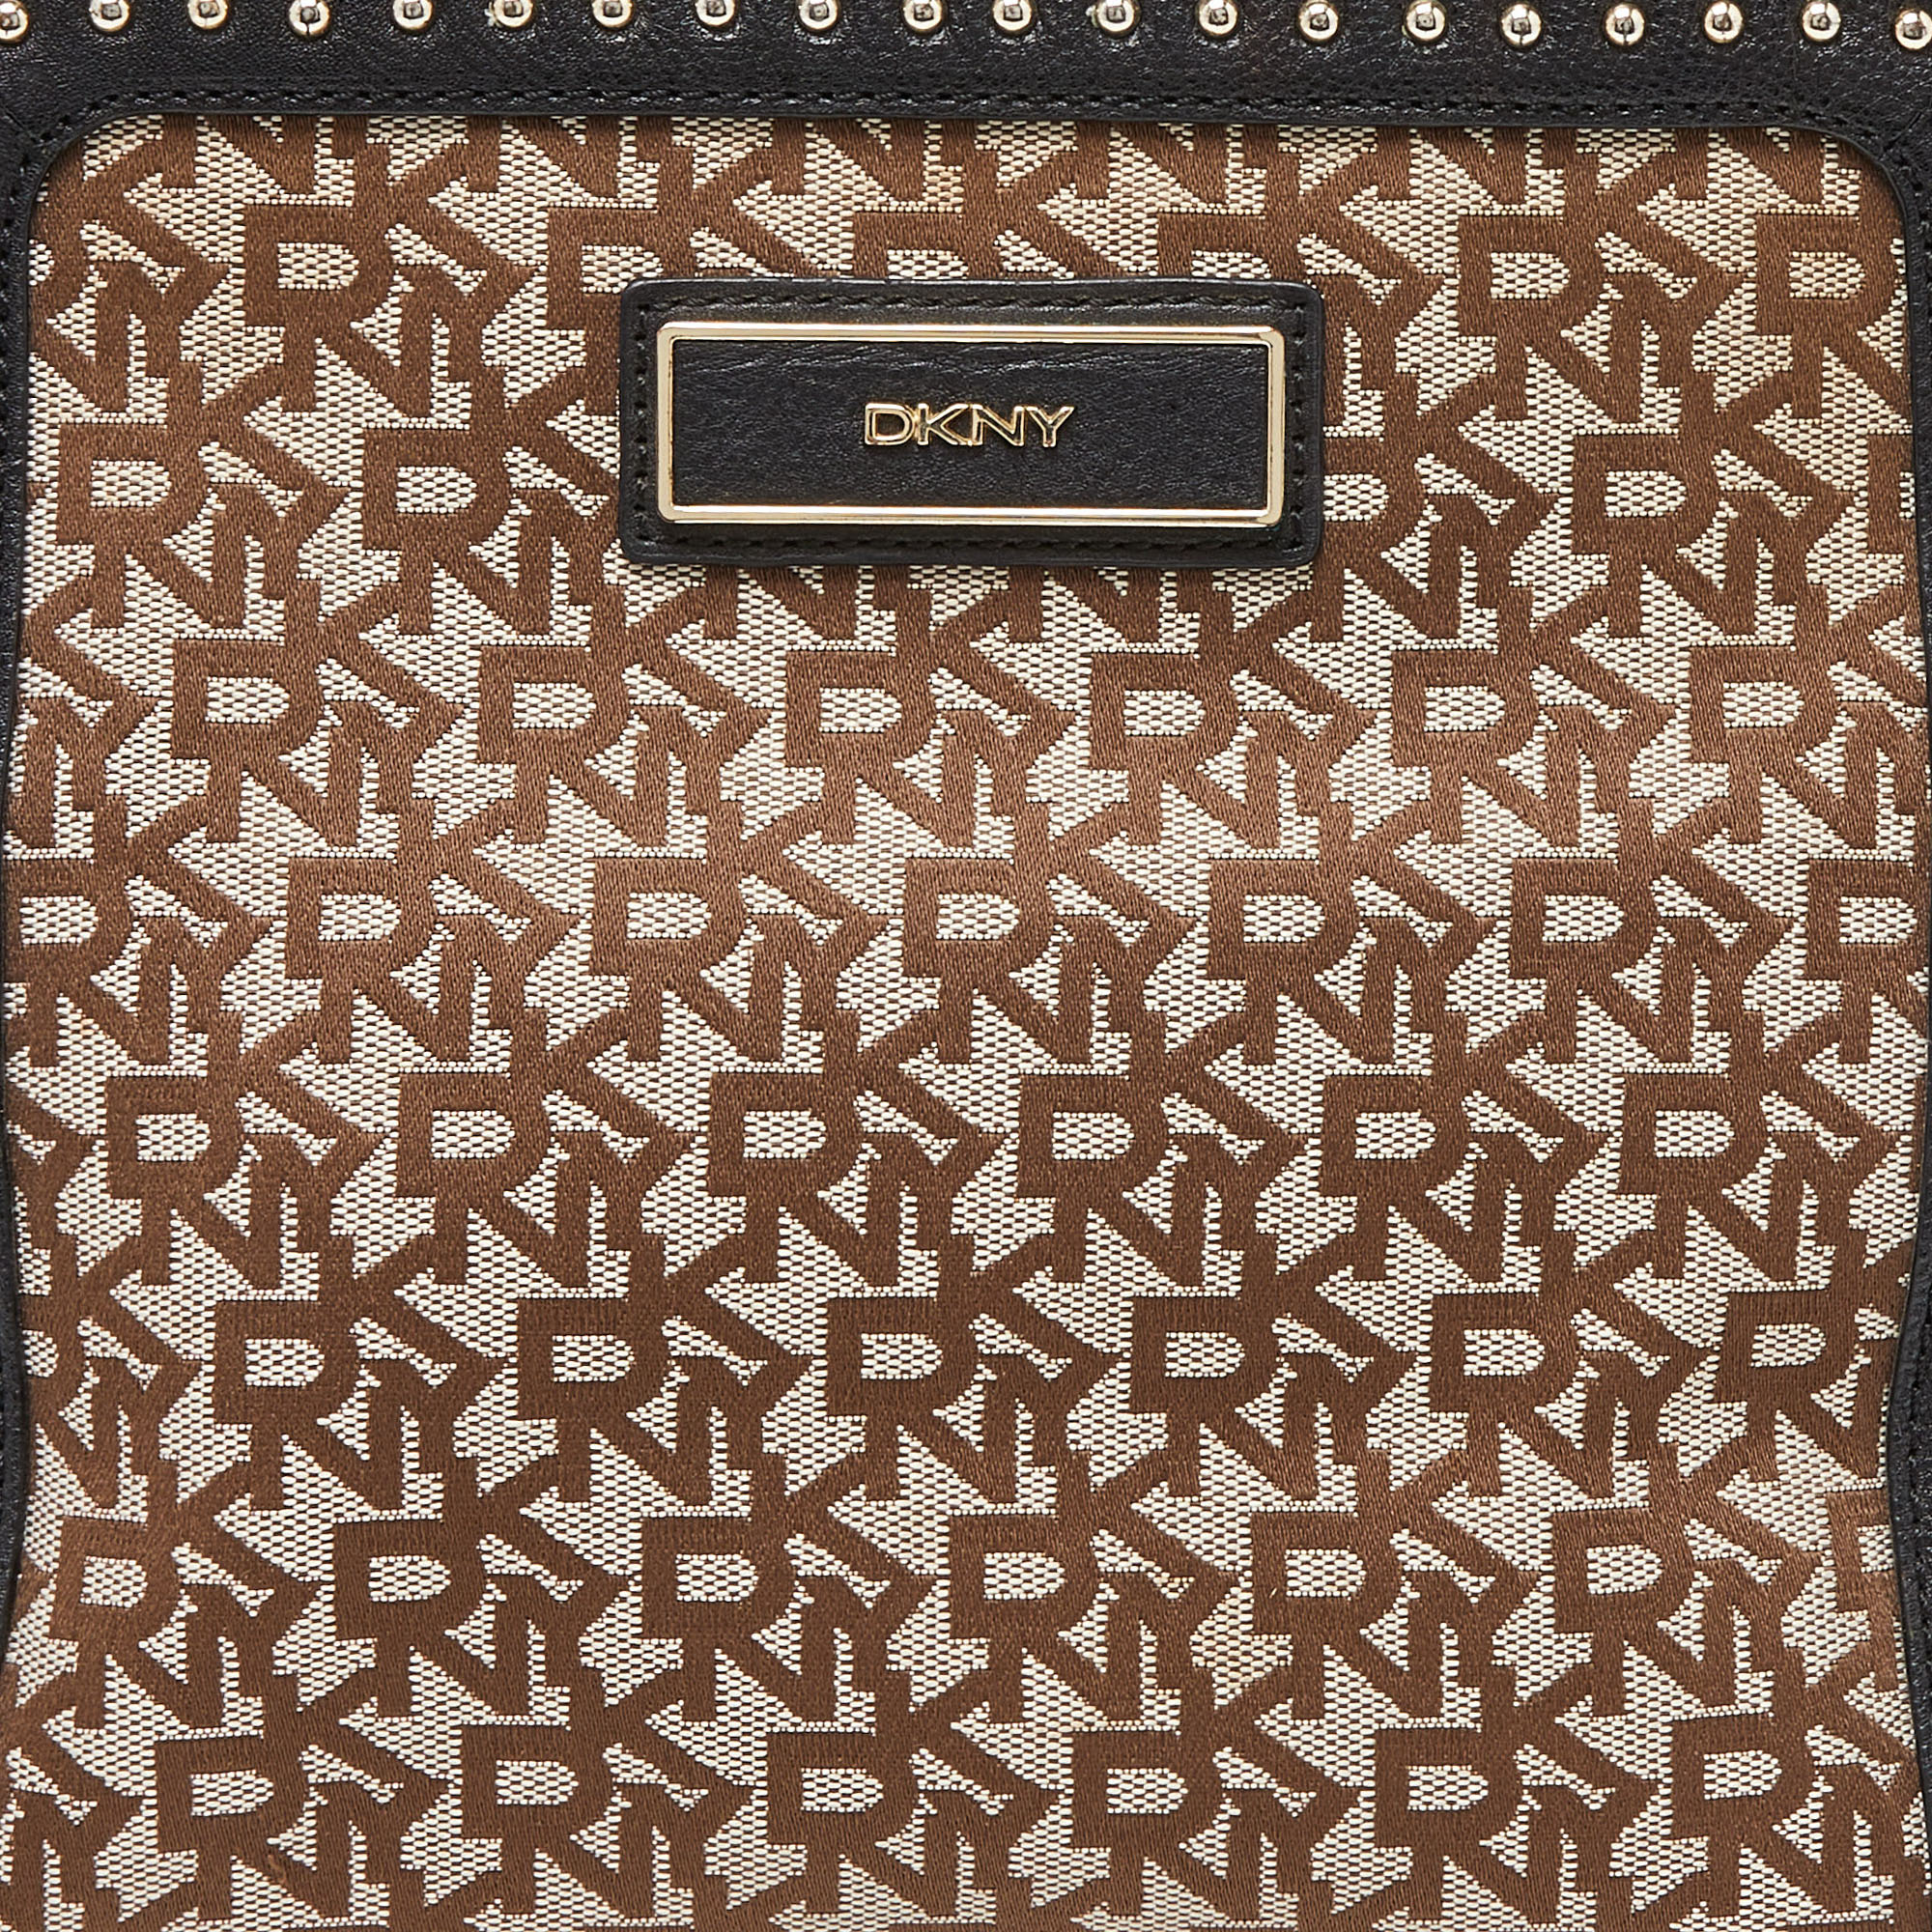 DKNY Beige/Black Signature Canvas And Leather Studded Satchel